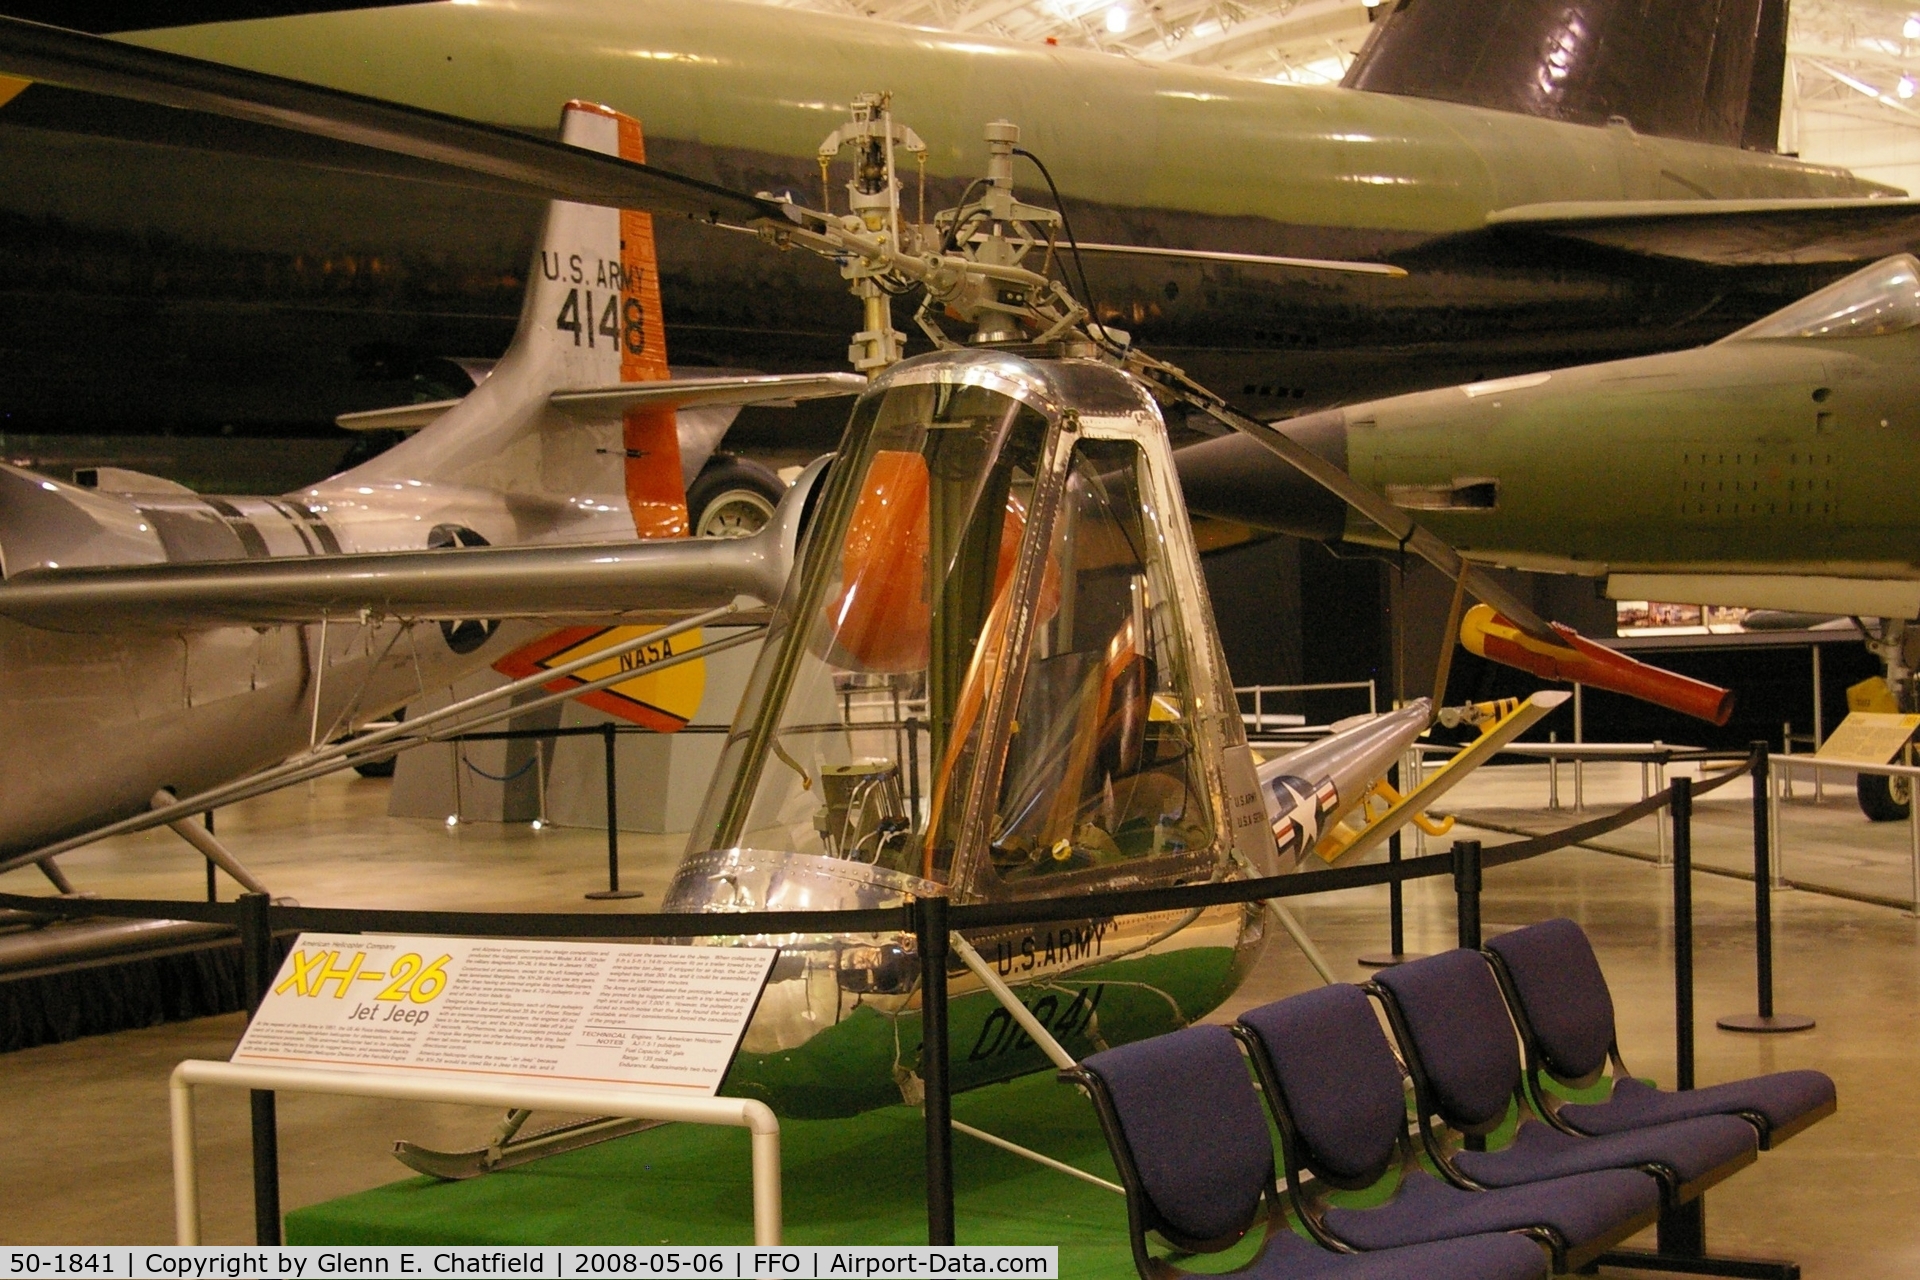 50-1841, 1951 American Helicopter Company XH-26 Jet Jeep C/N Unknown, Displayed at the National Museum of the U.S. Air Force